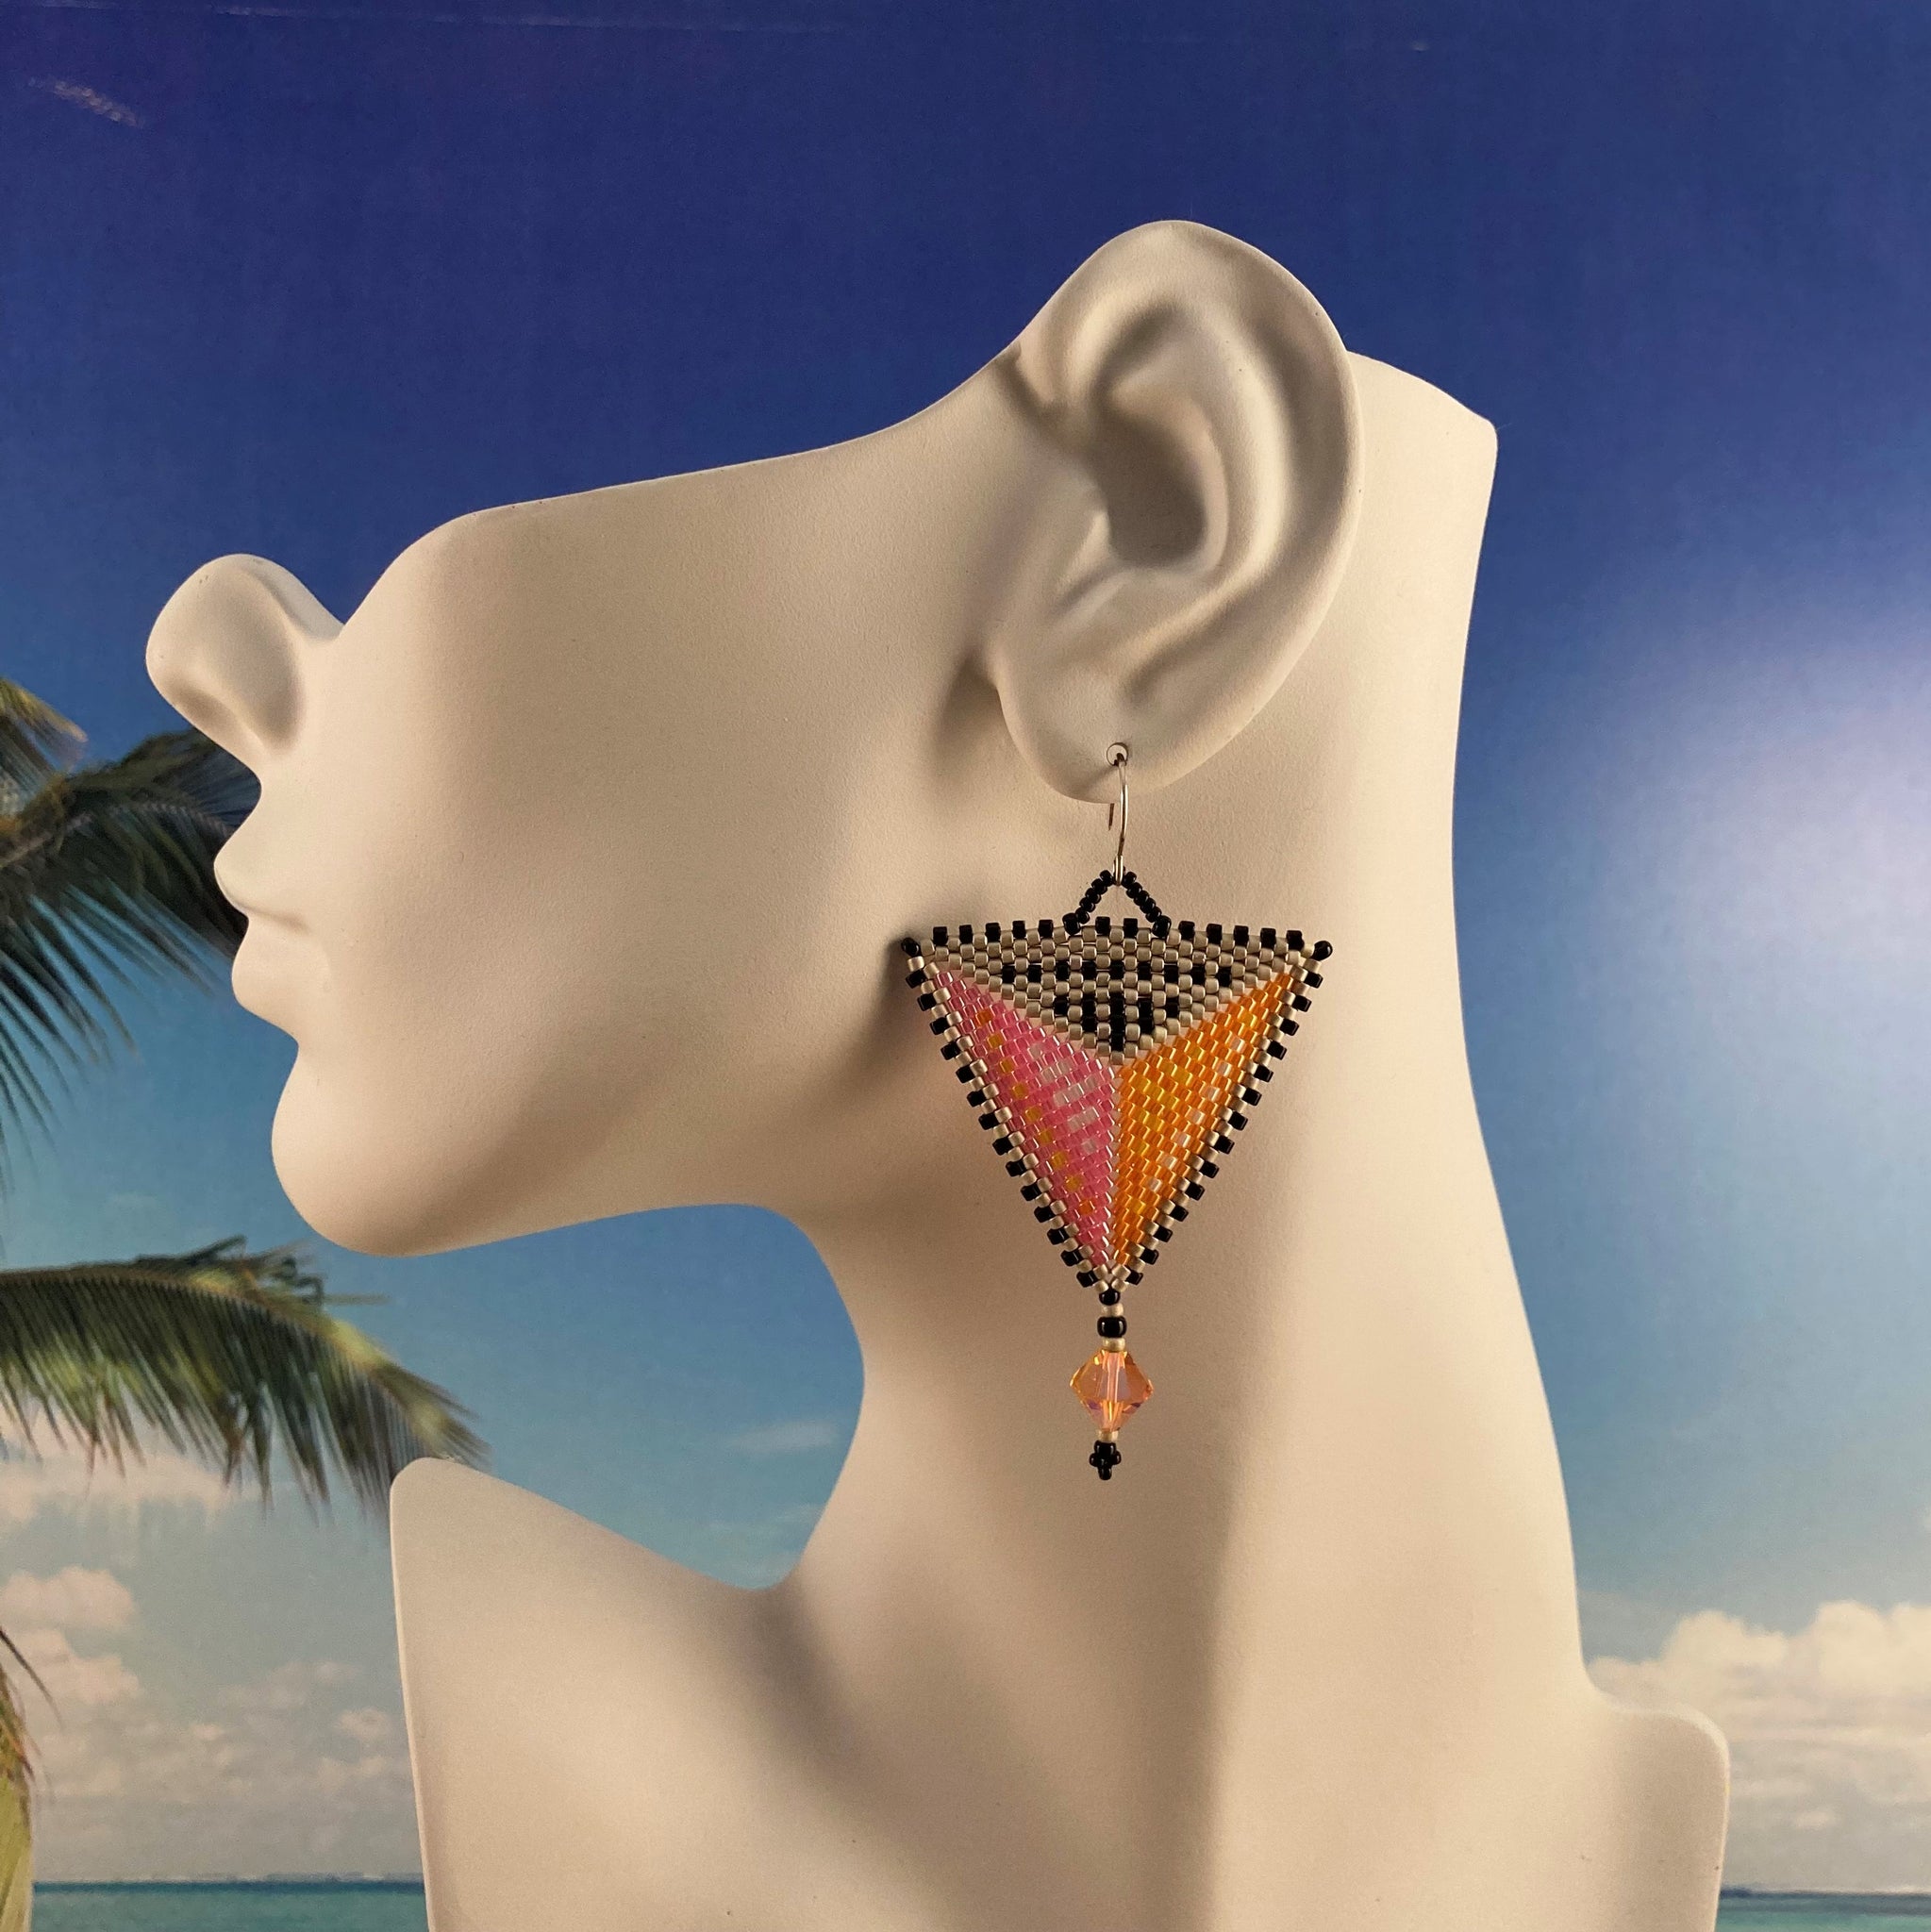 Orange and pink Contemporary Triangle Modern Beaded Earrings matching Large Swarovski crystals  sterling silver ear wires lightweight stunning artisan handmade Beaded By The Beach couture 